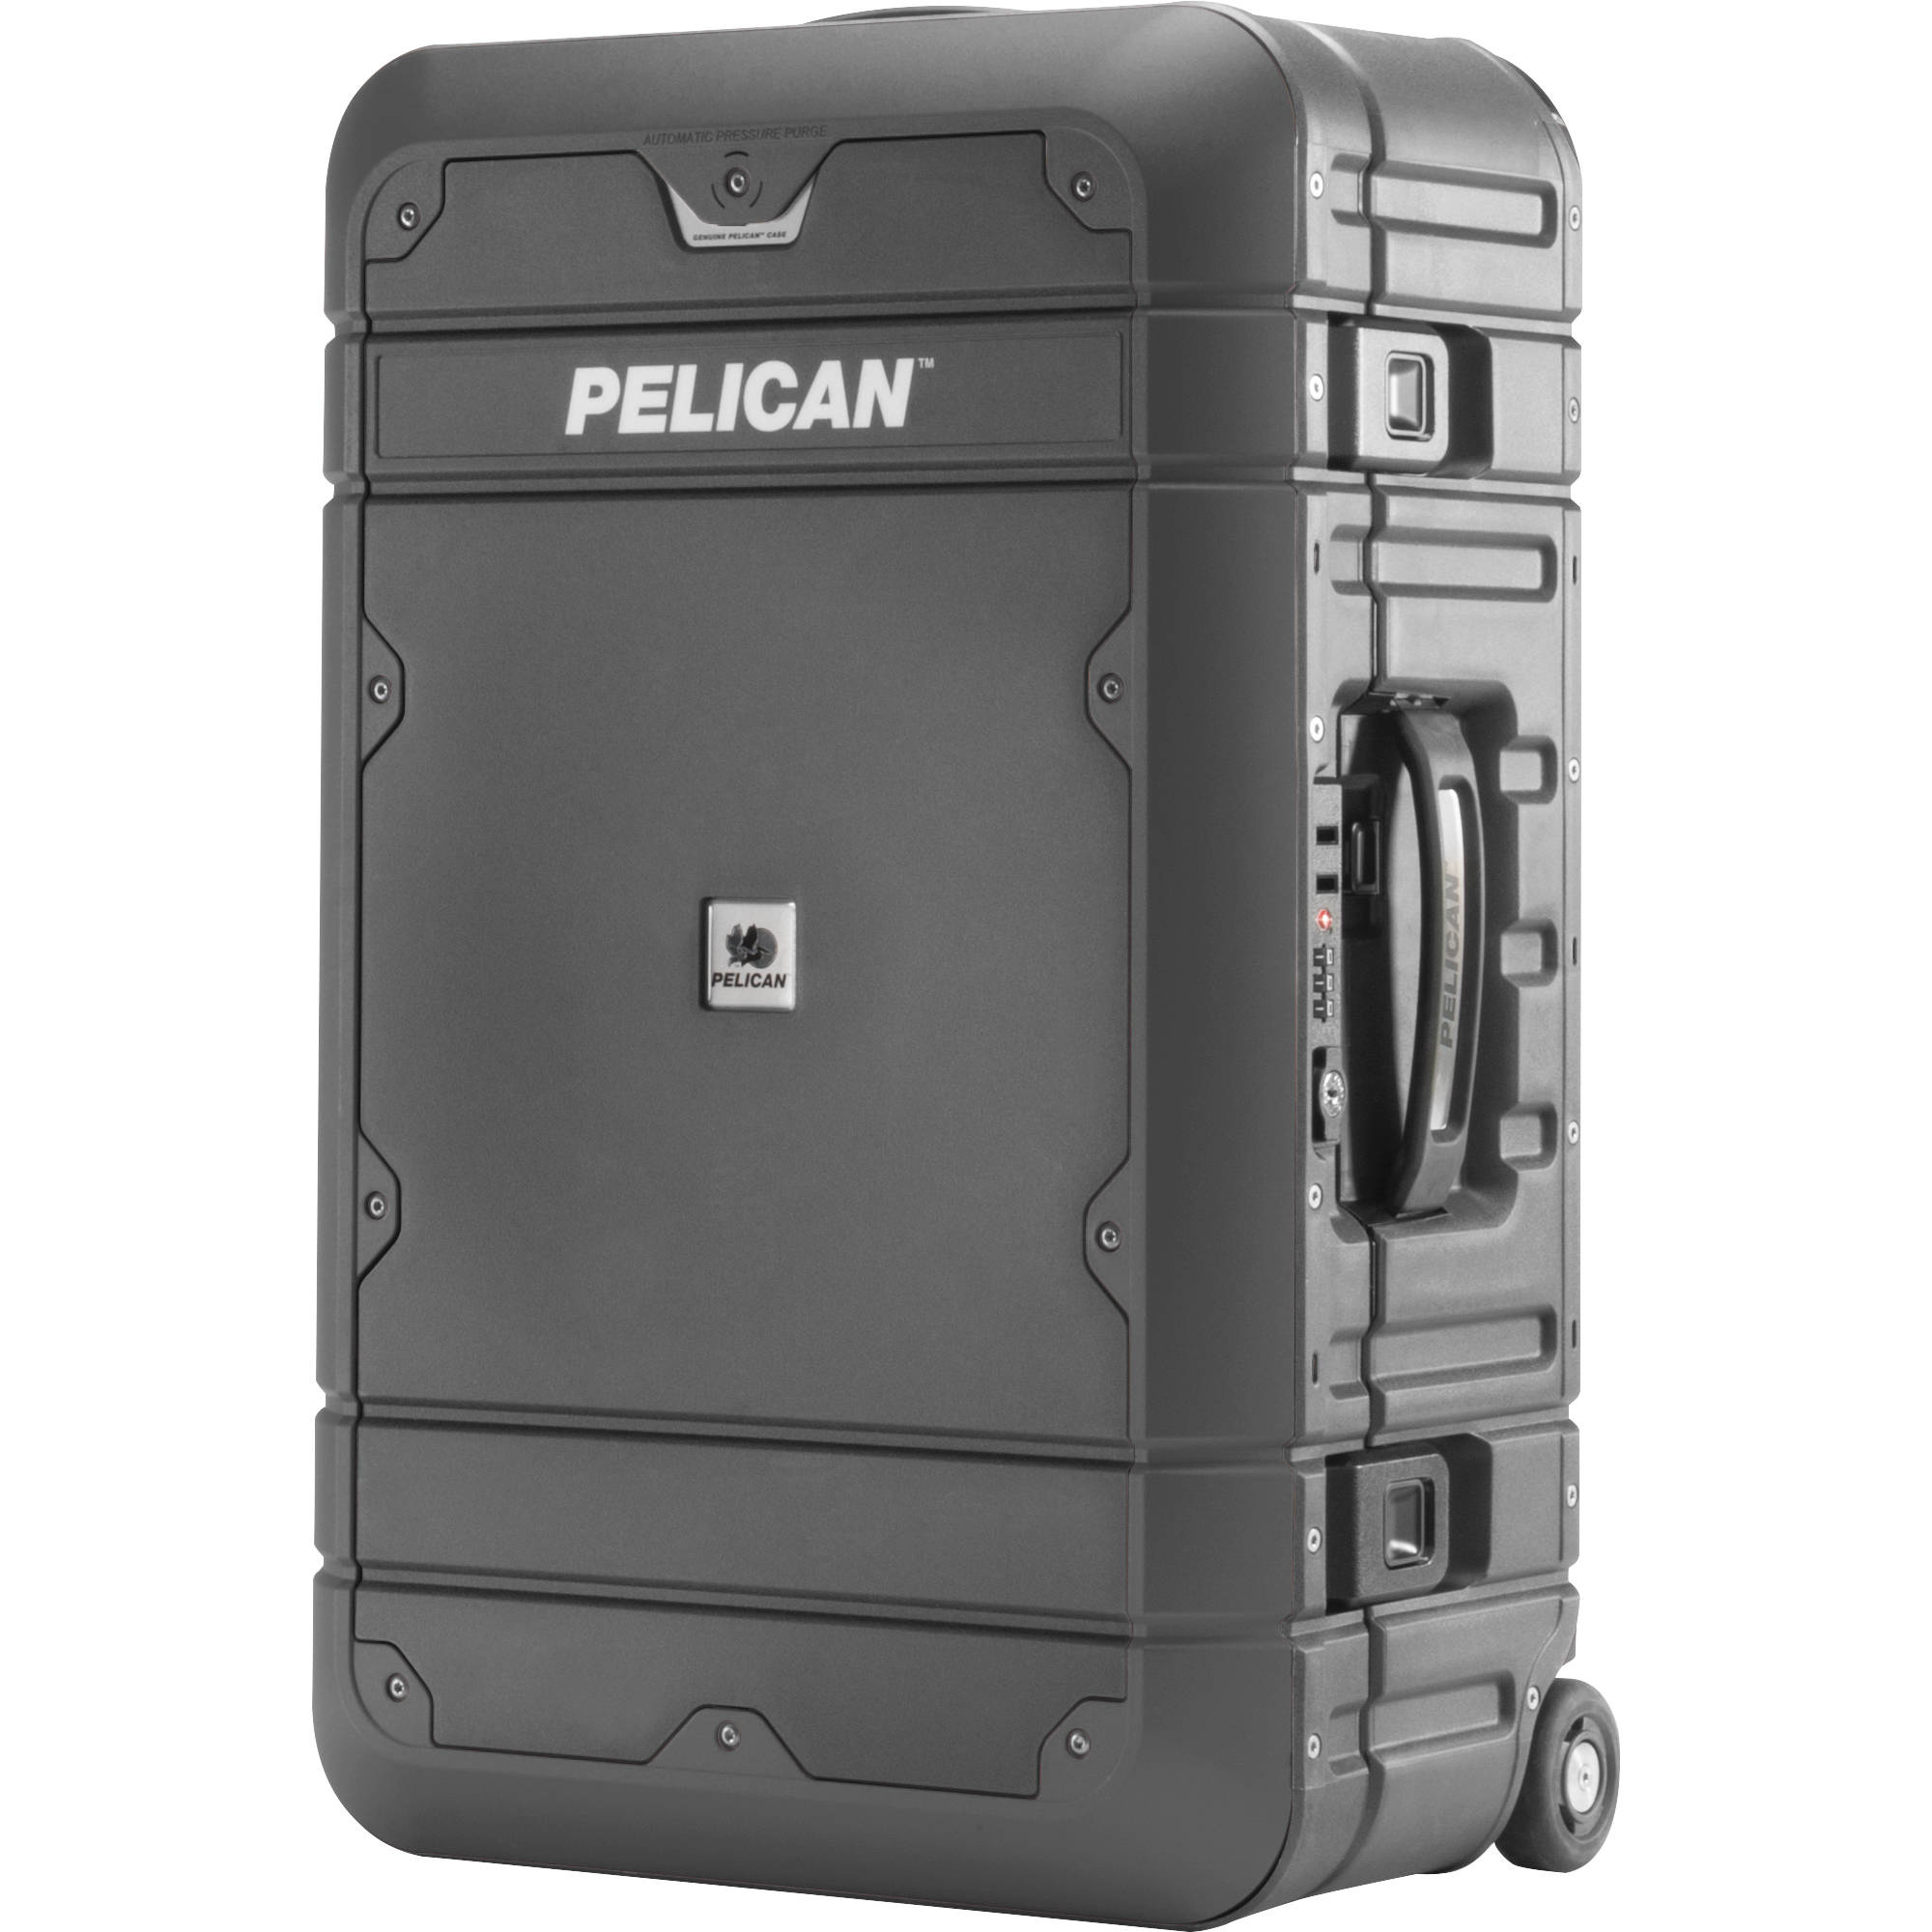 Pelican EL22 Elite Carry-On Luggage with Enhanced Travel System (Grey and Black)